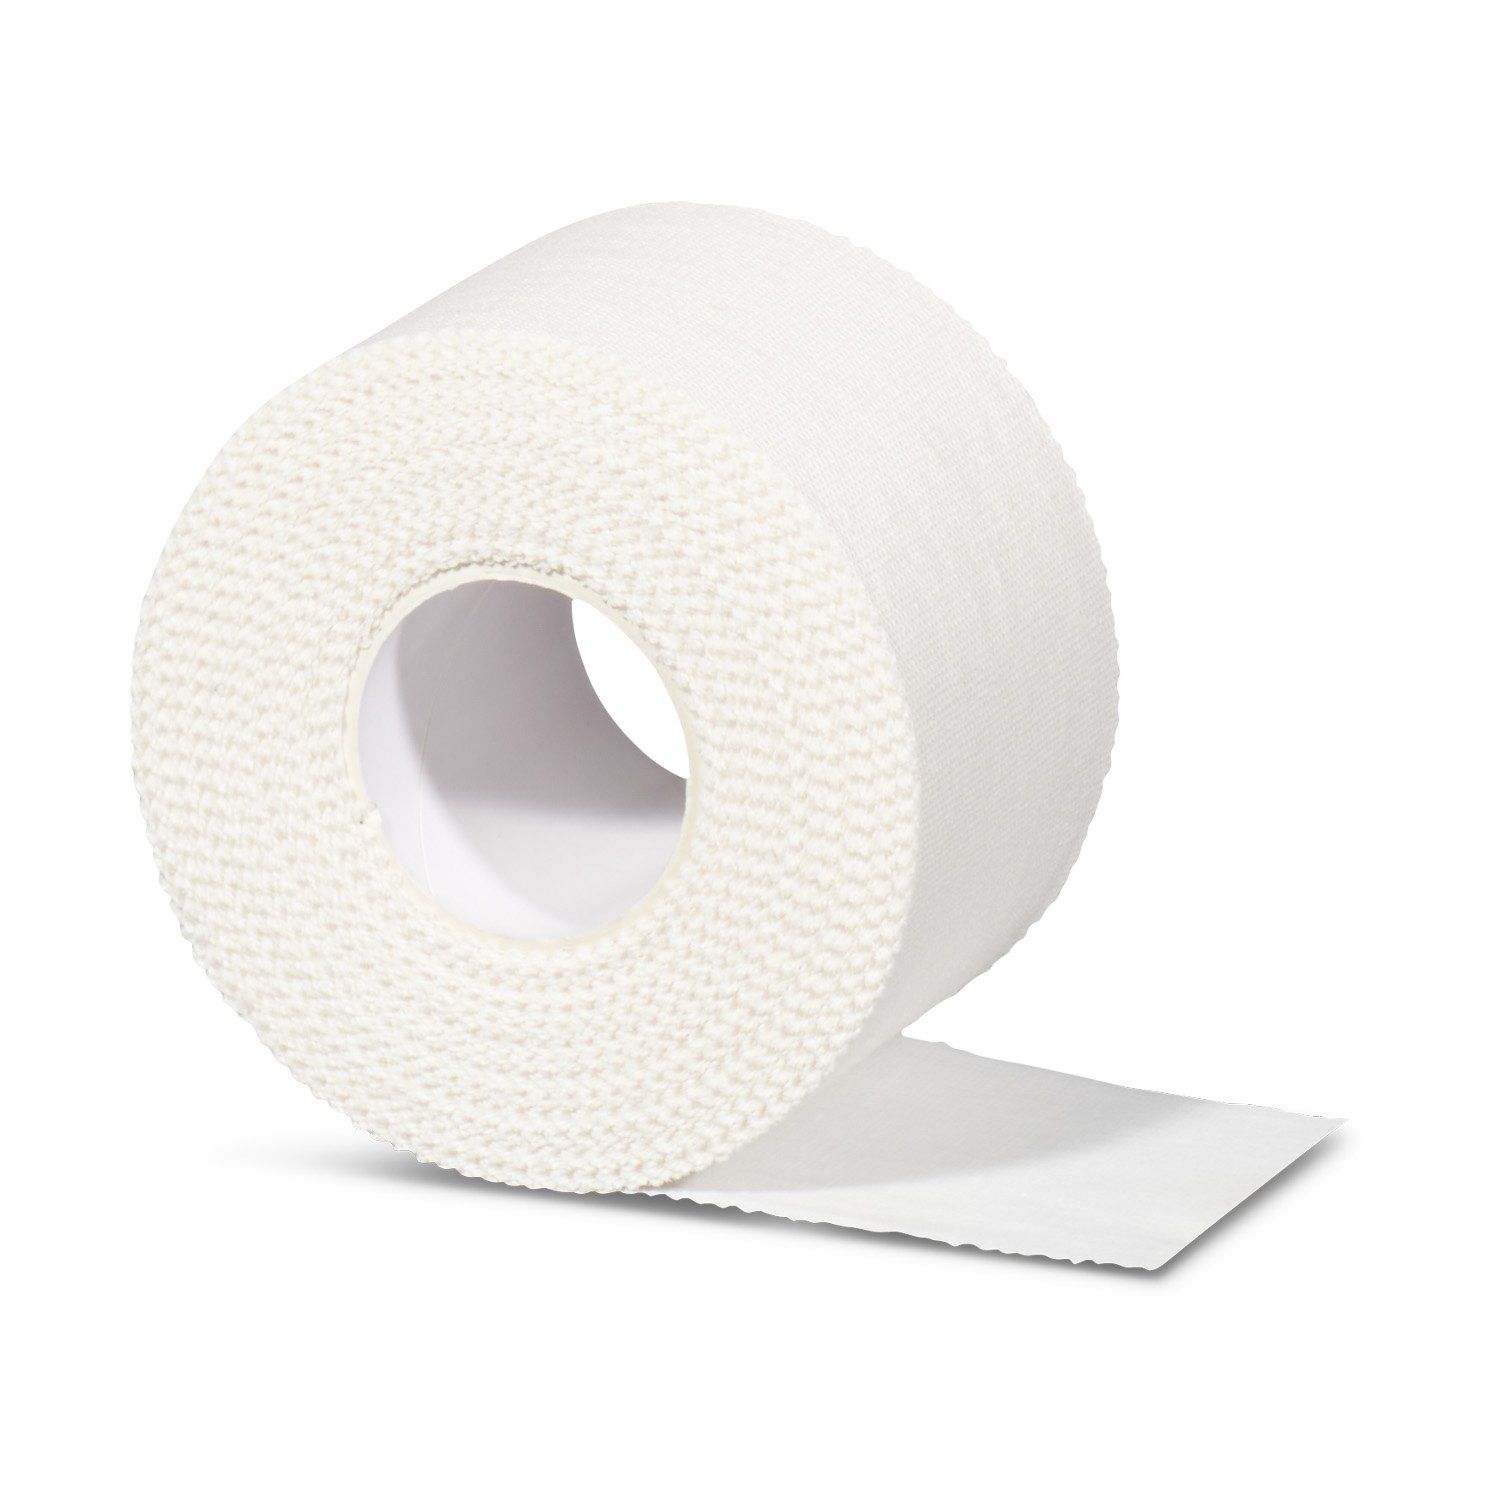 gladiator sports sports tape per roll for sale